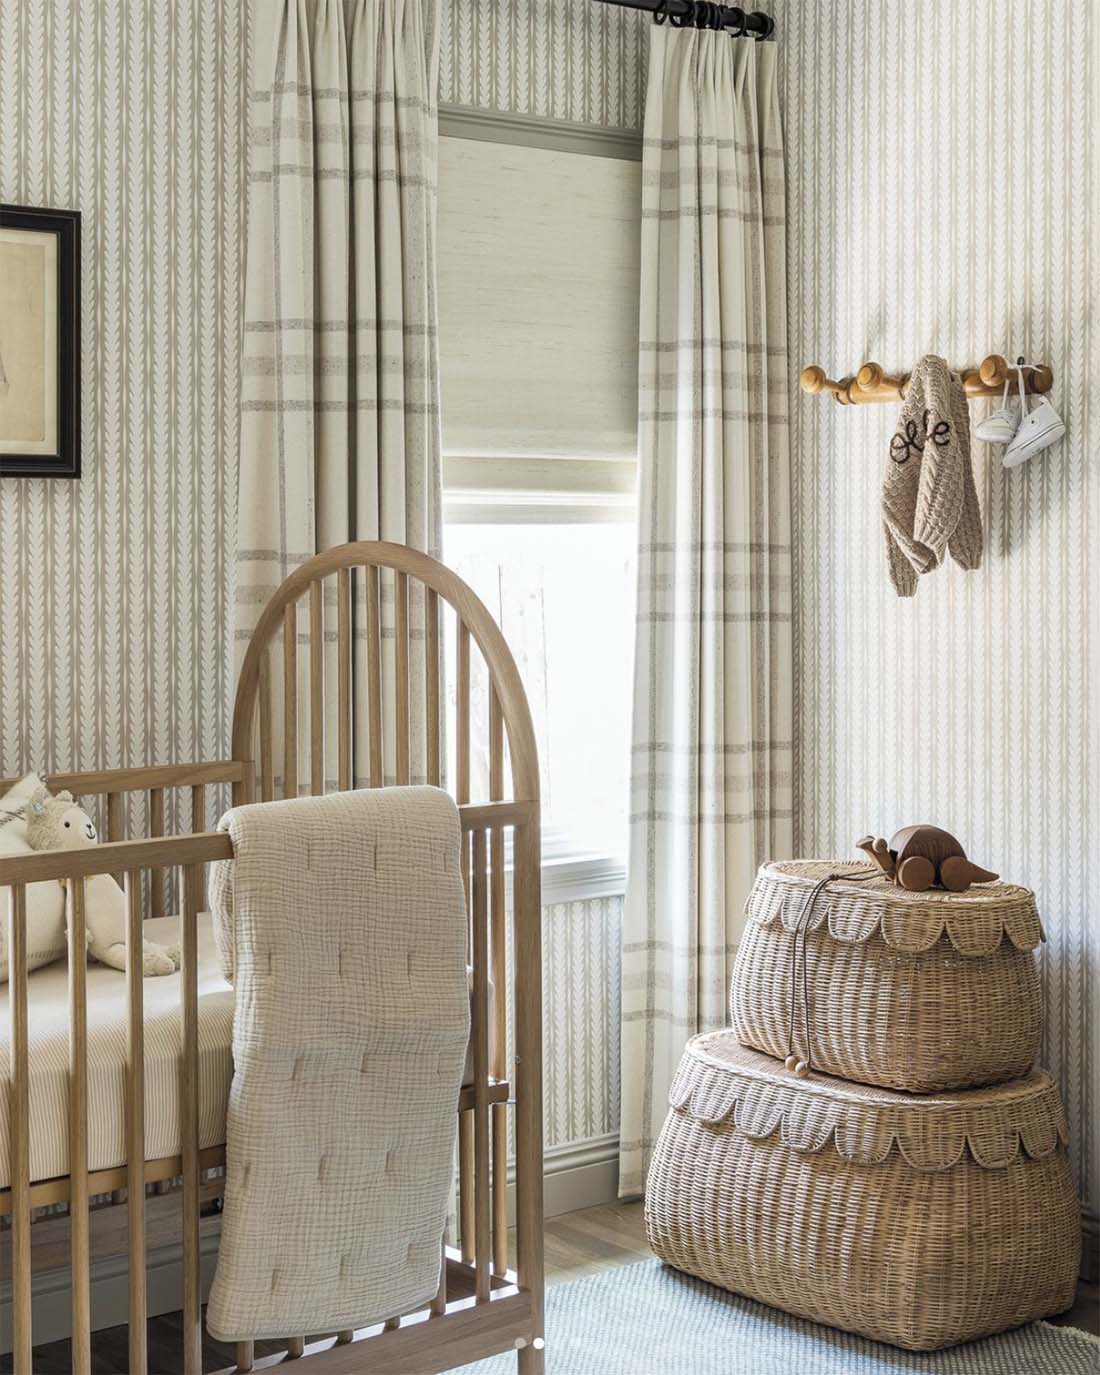 wallpaper-trends-in-nurseries-with-gender-neutral-color-scheme-tan-and-white-nursery